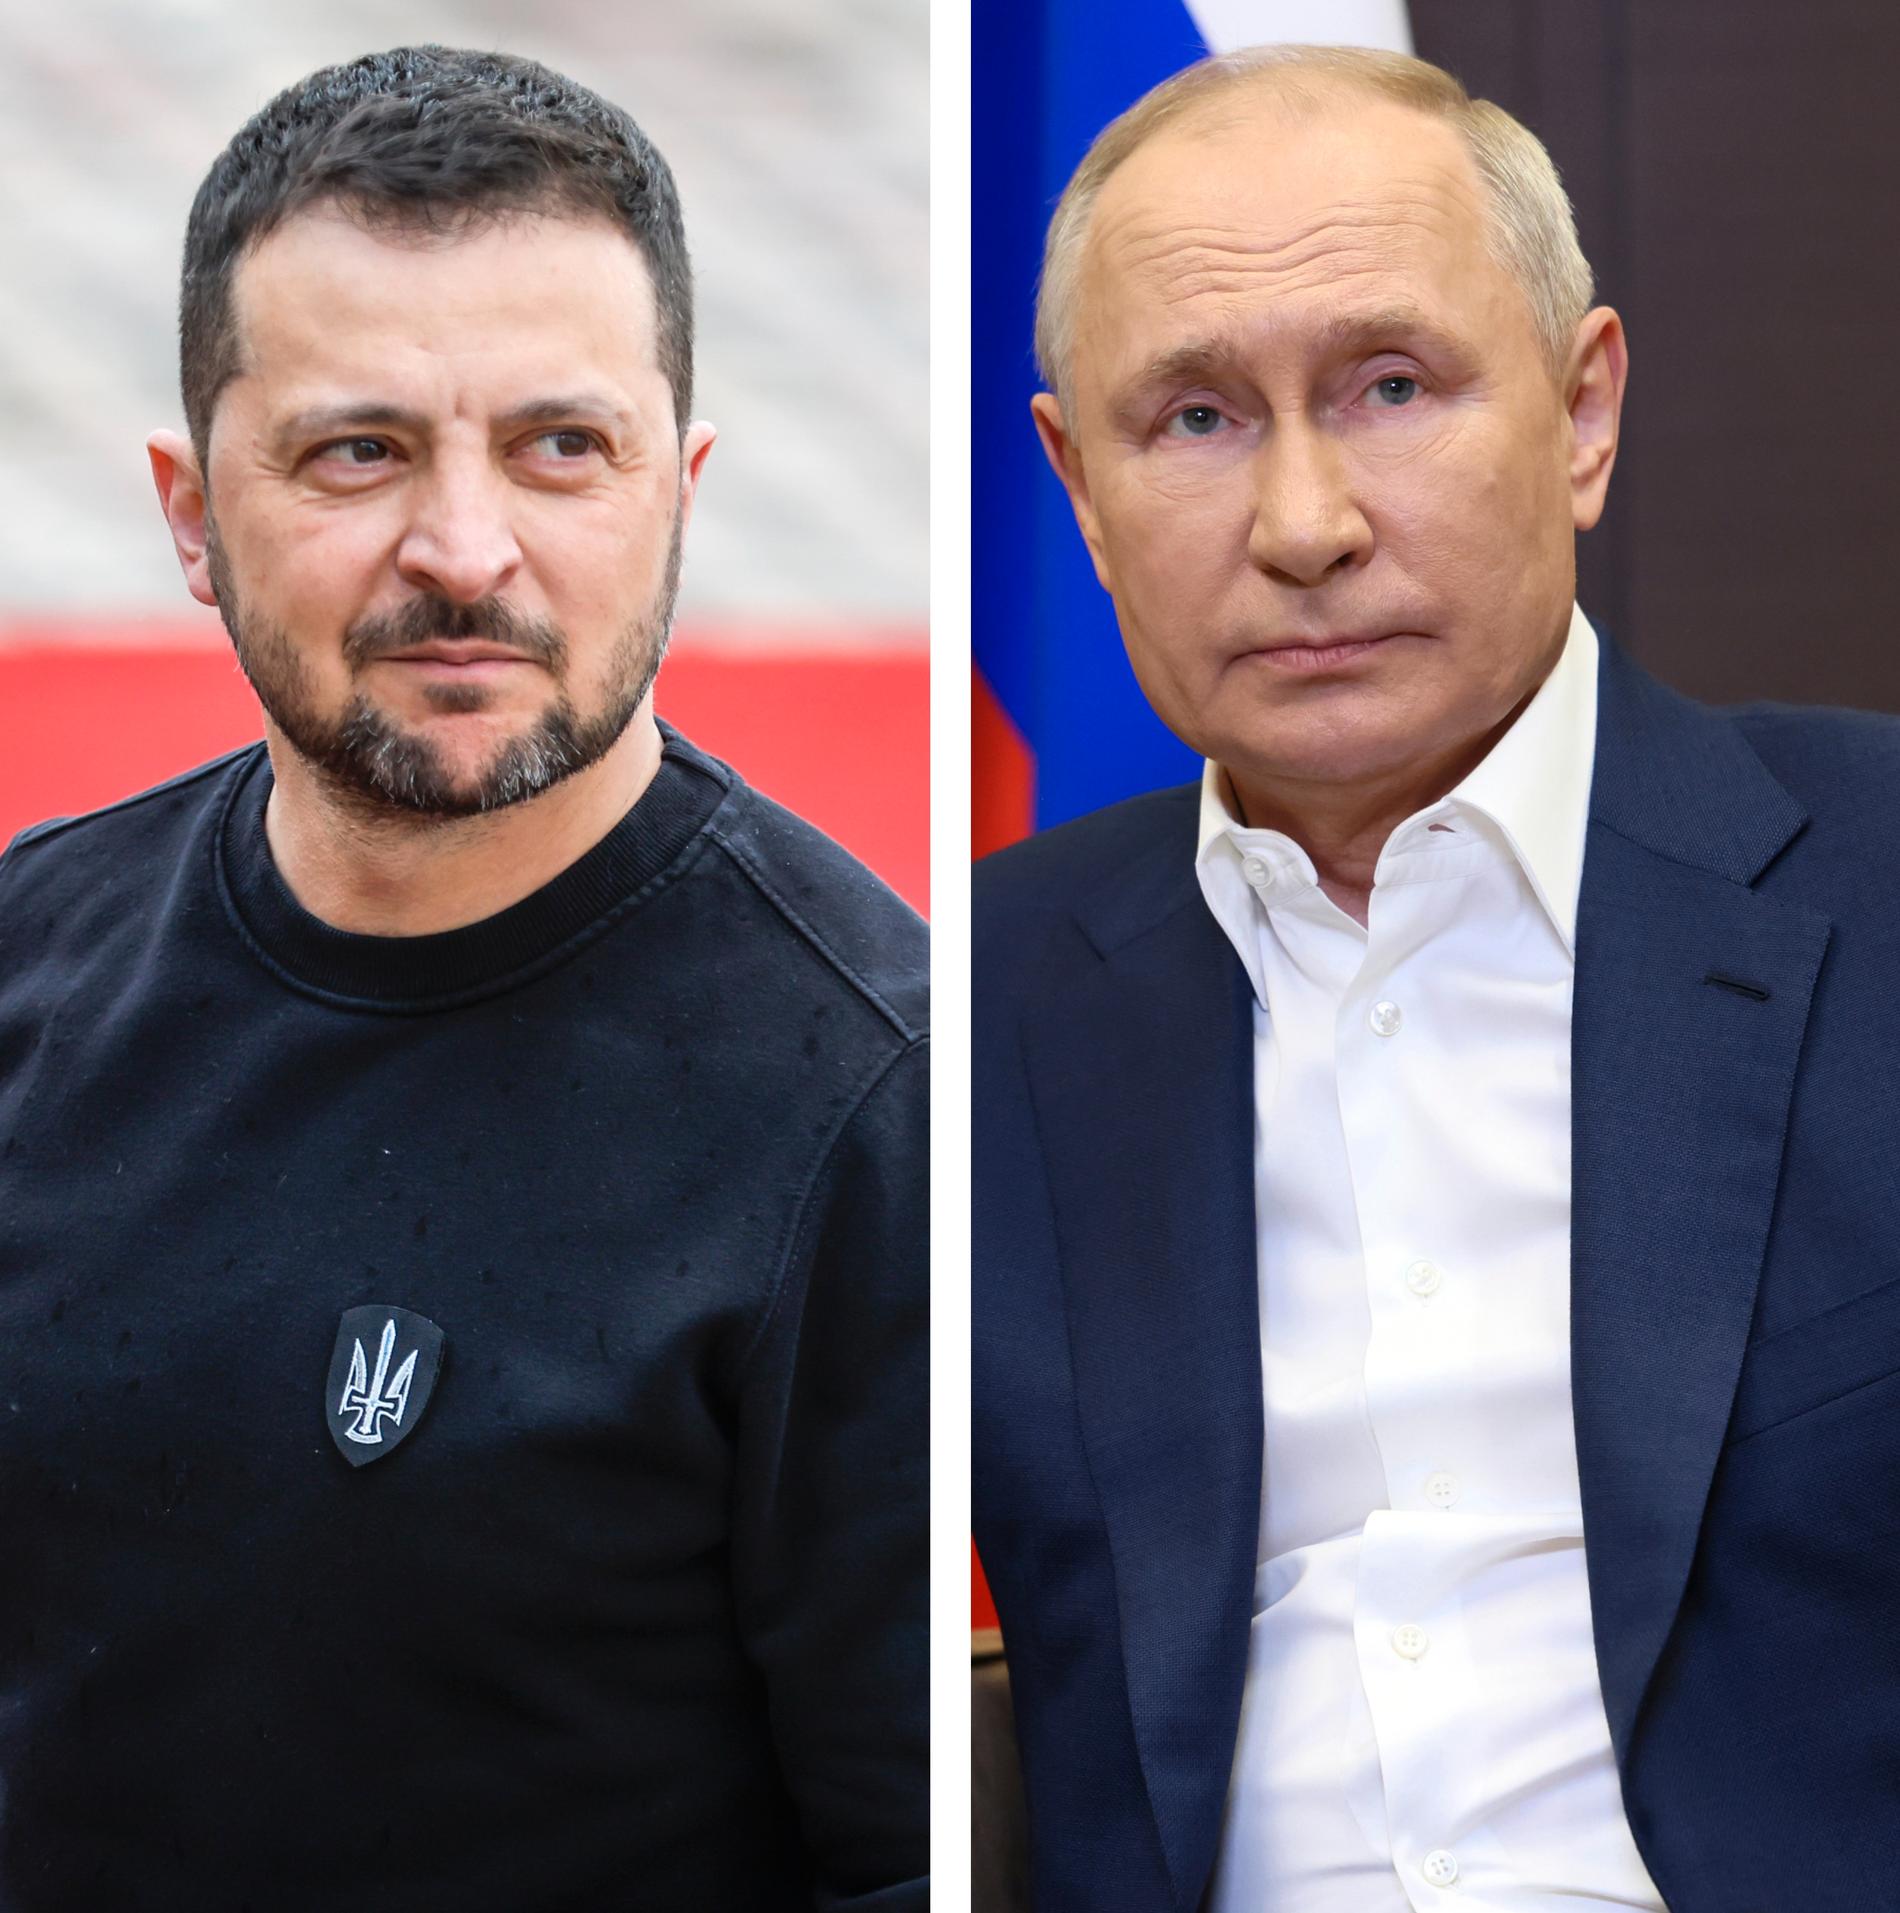 Can Vladimir Putin and Volodymyr Zelenskyj Negotiate? Experts Weigh In